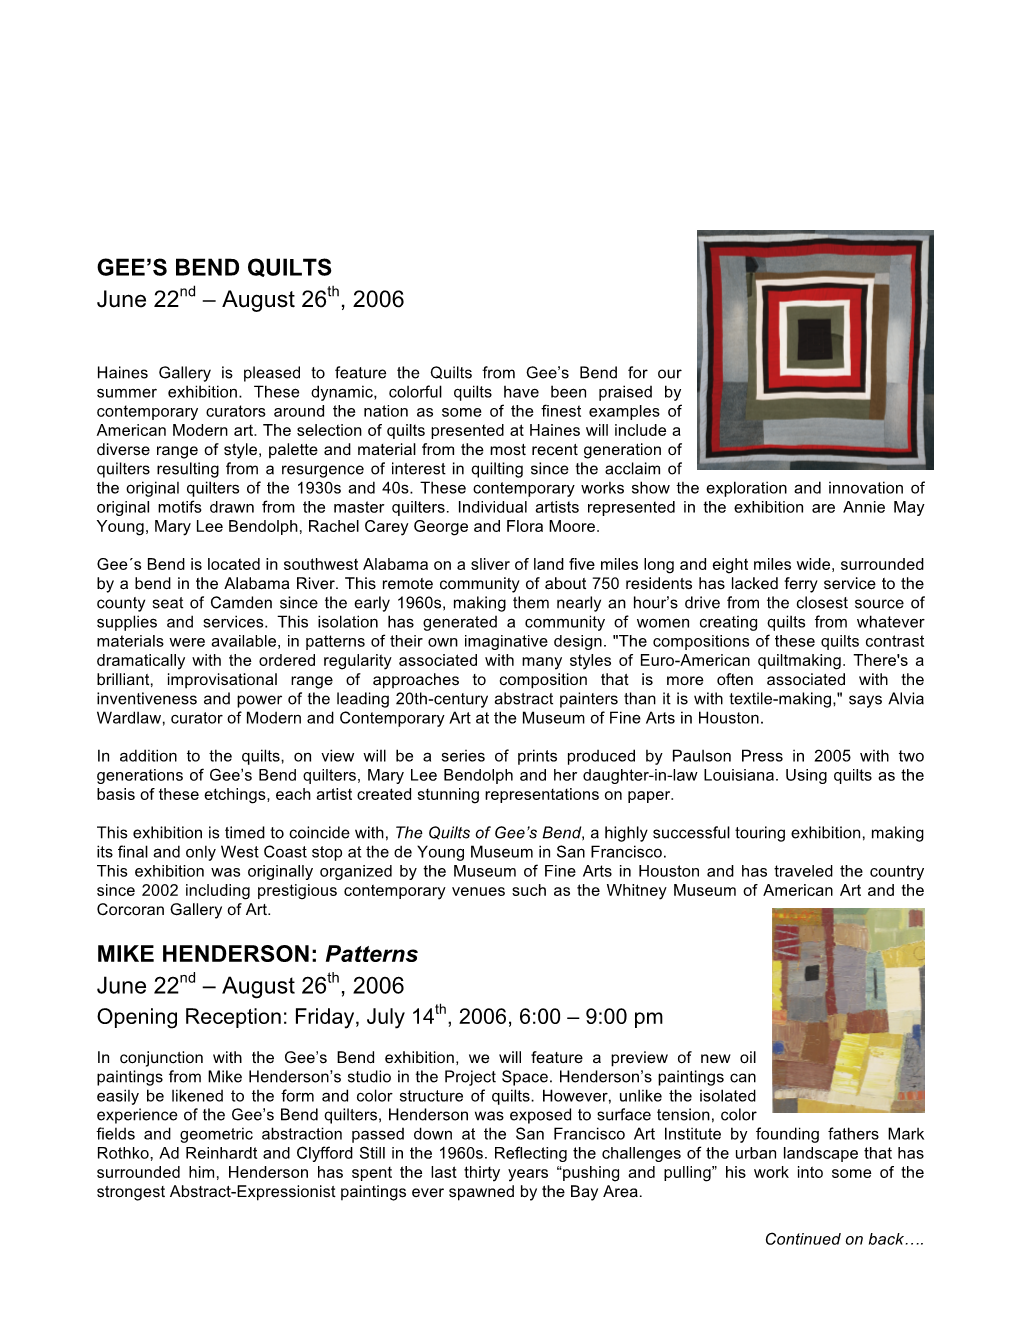 GEE's BEND QUILTS June 22Nd – August 26Th, 2006